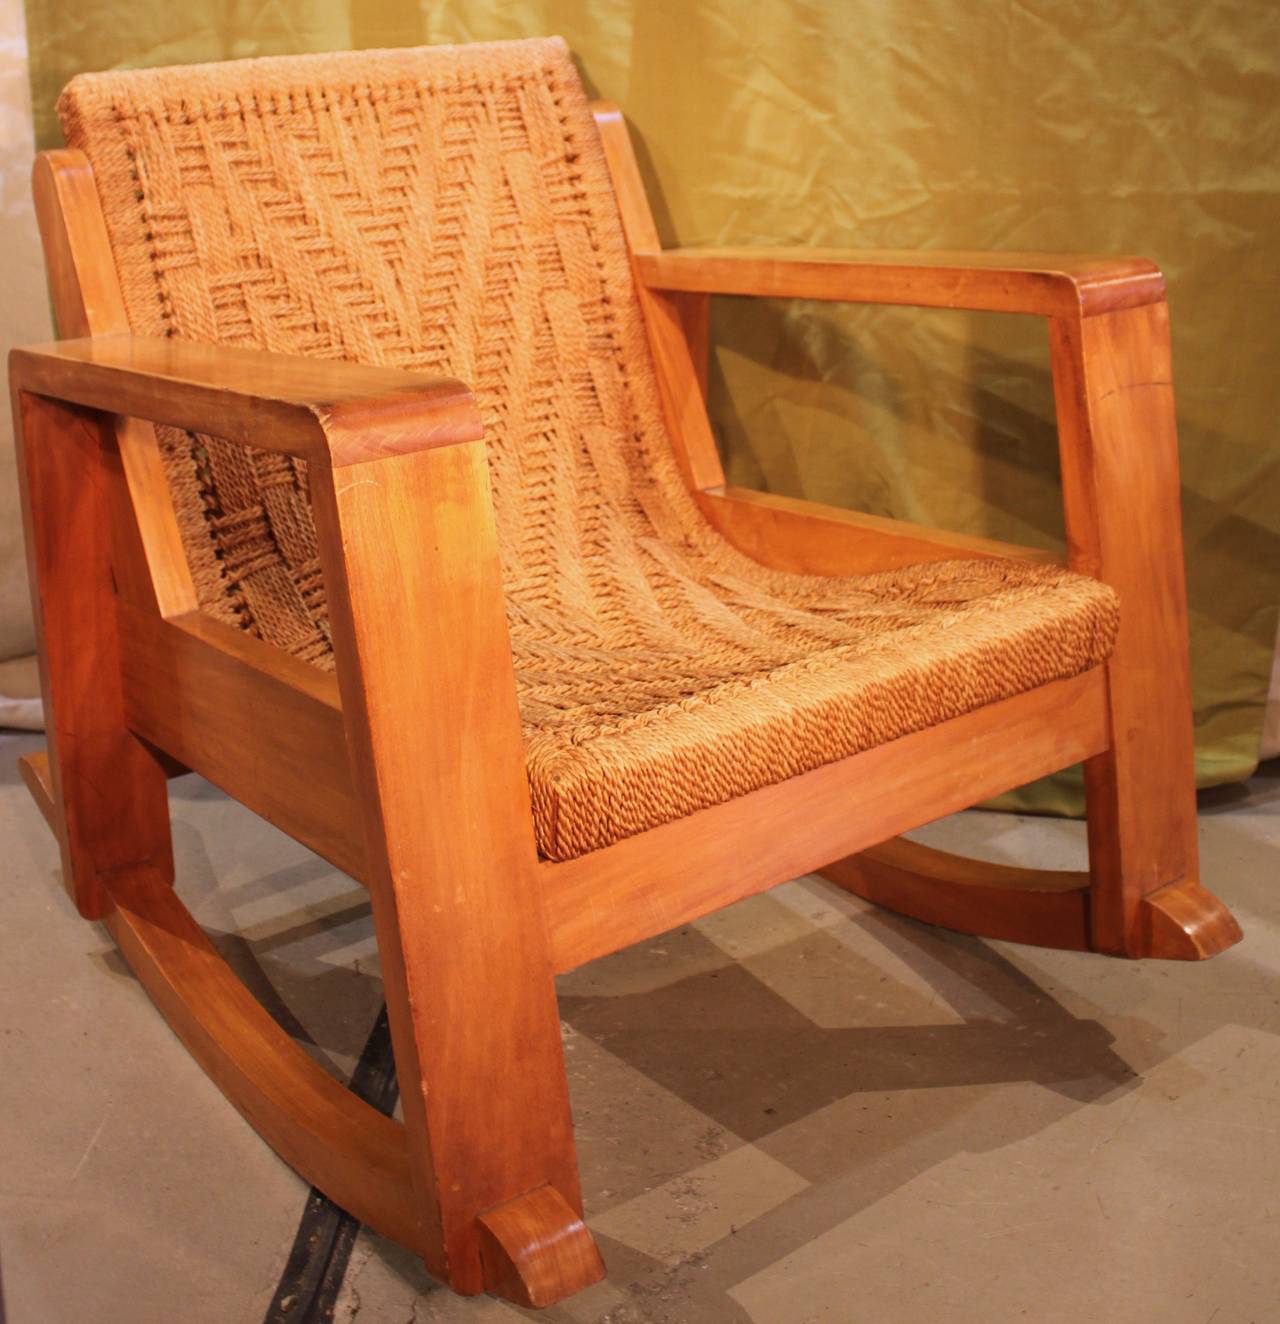 Early Knoll rocker.  Handwoven seat.  Excellent condition.  Collector's item